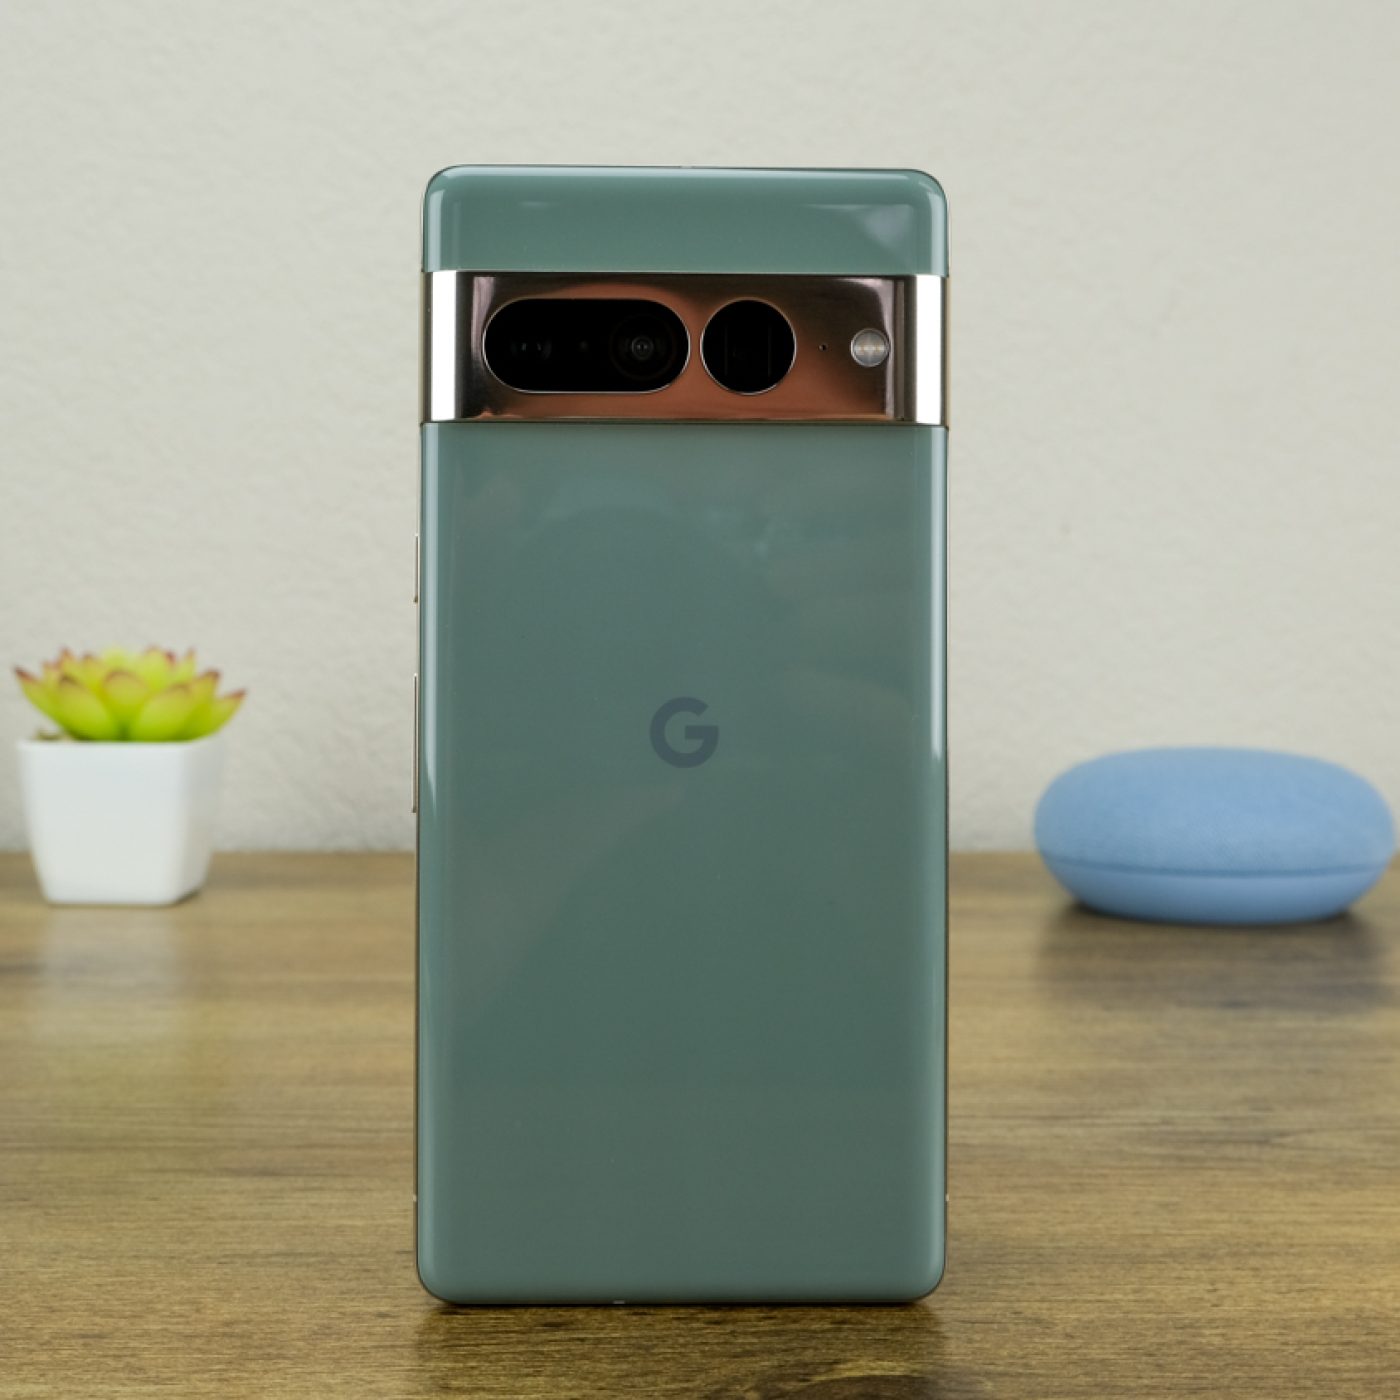 Google Pixel 7a stars in hands-on leak with smaller battery than Pixel 6a -   News